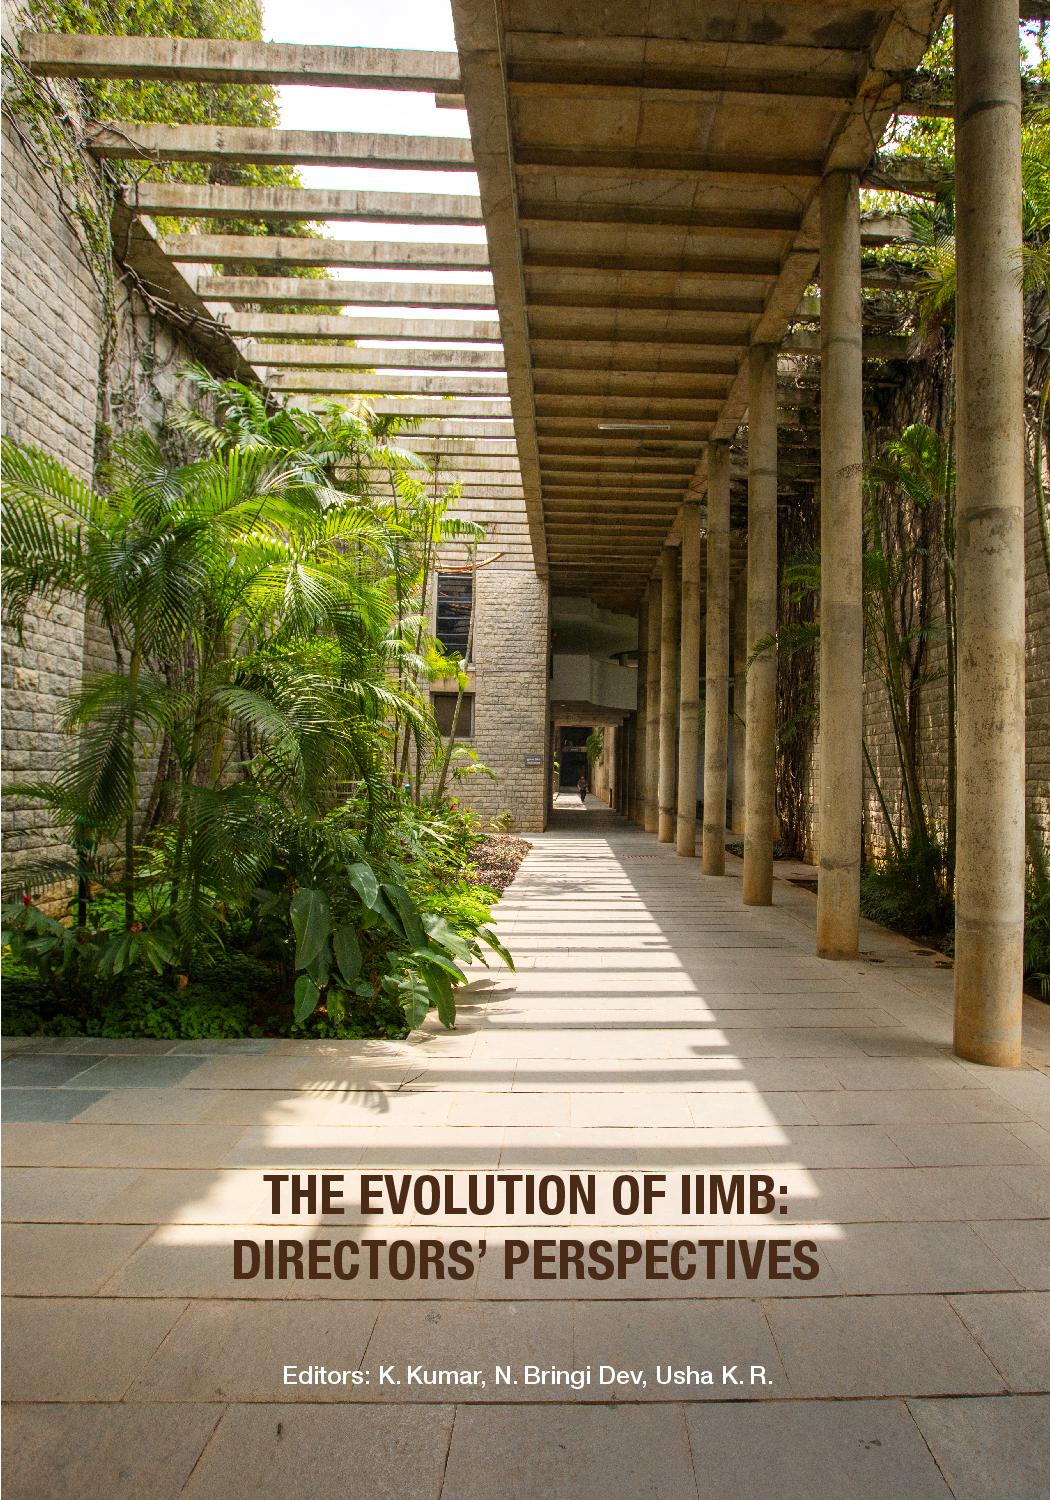 Cover Page of "The Evolution of IIMB: Directors' Perspectives"